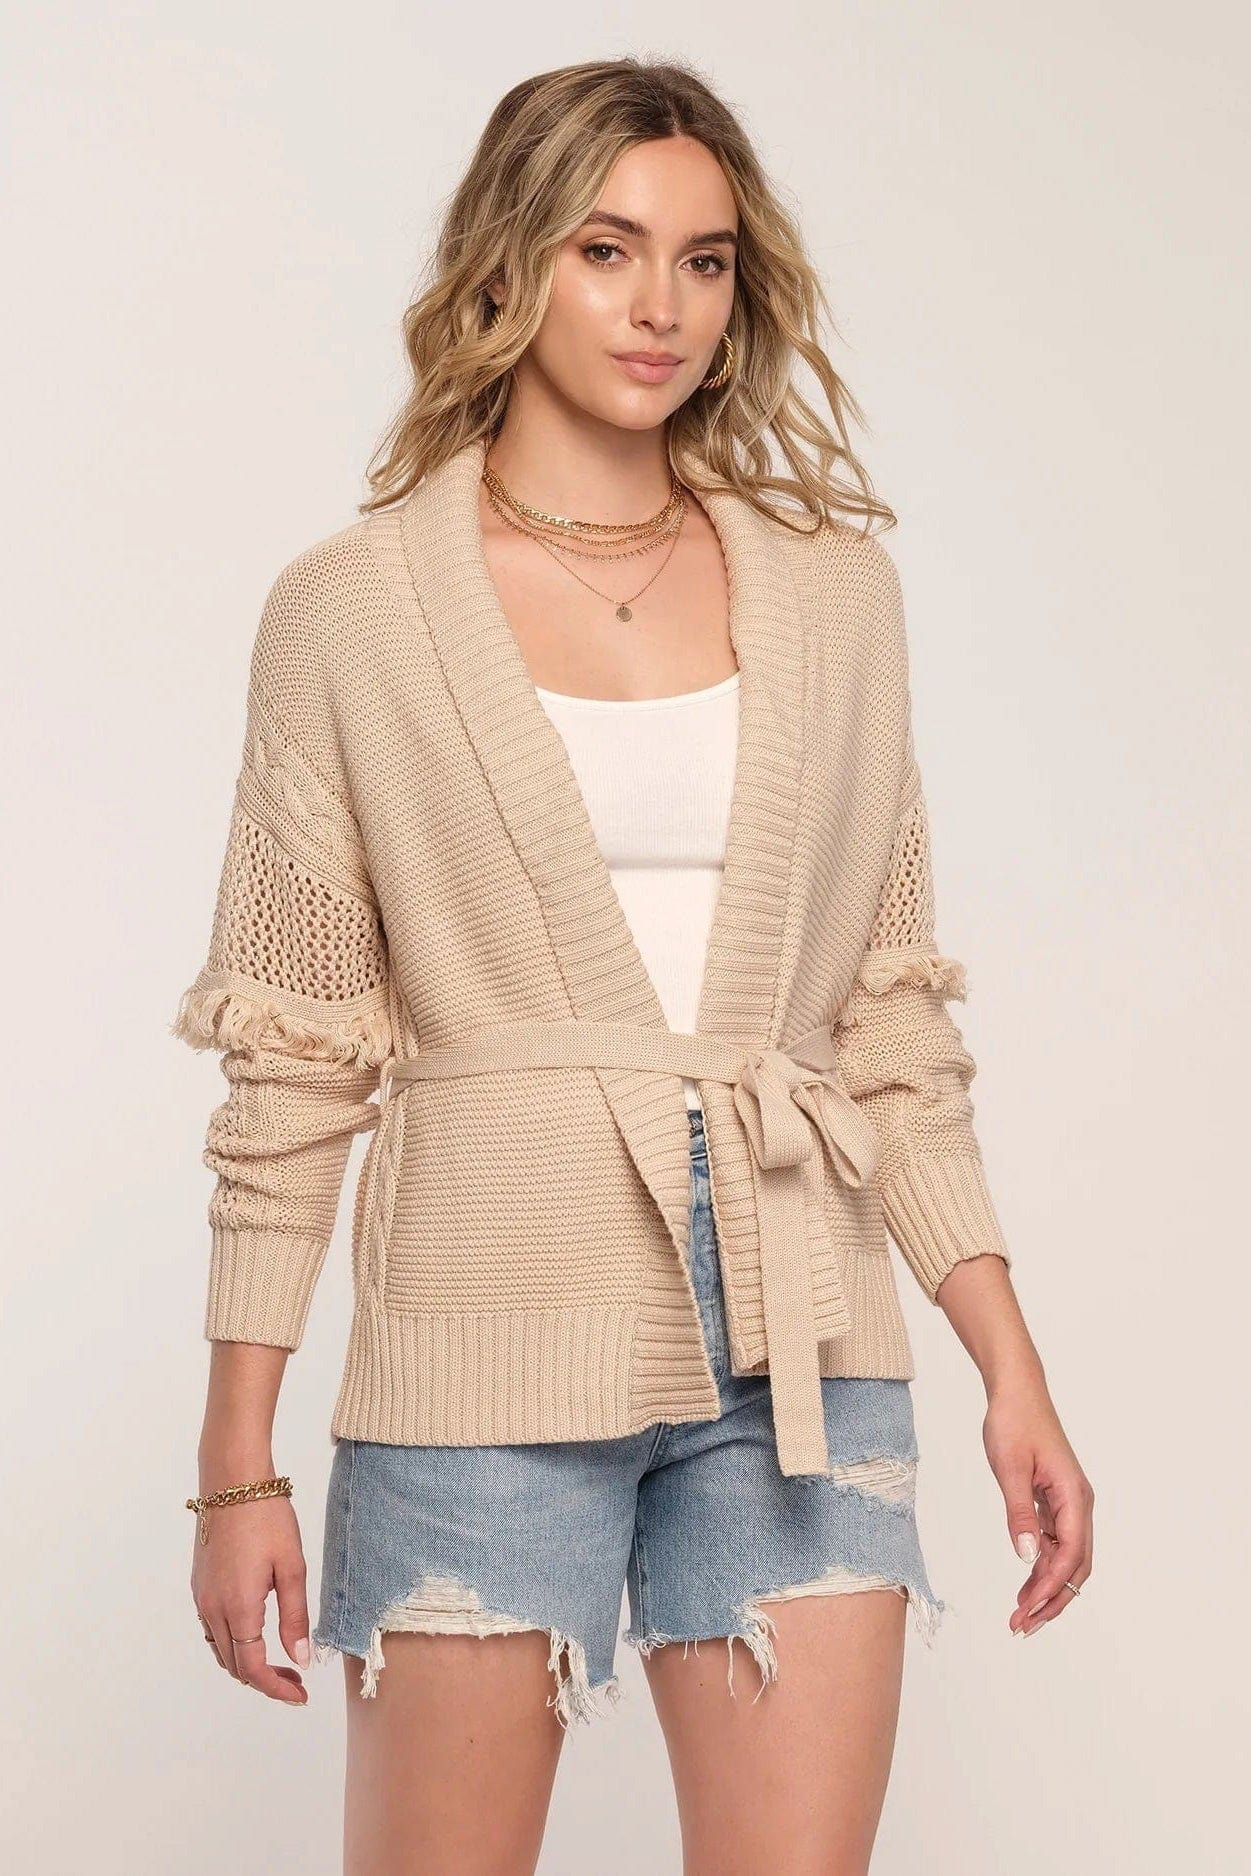 Azura Fringe Cardi in Dune by Heartloom - Shirts & Tops - Blooming Daily